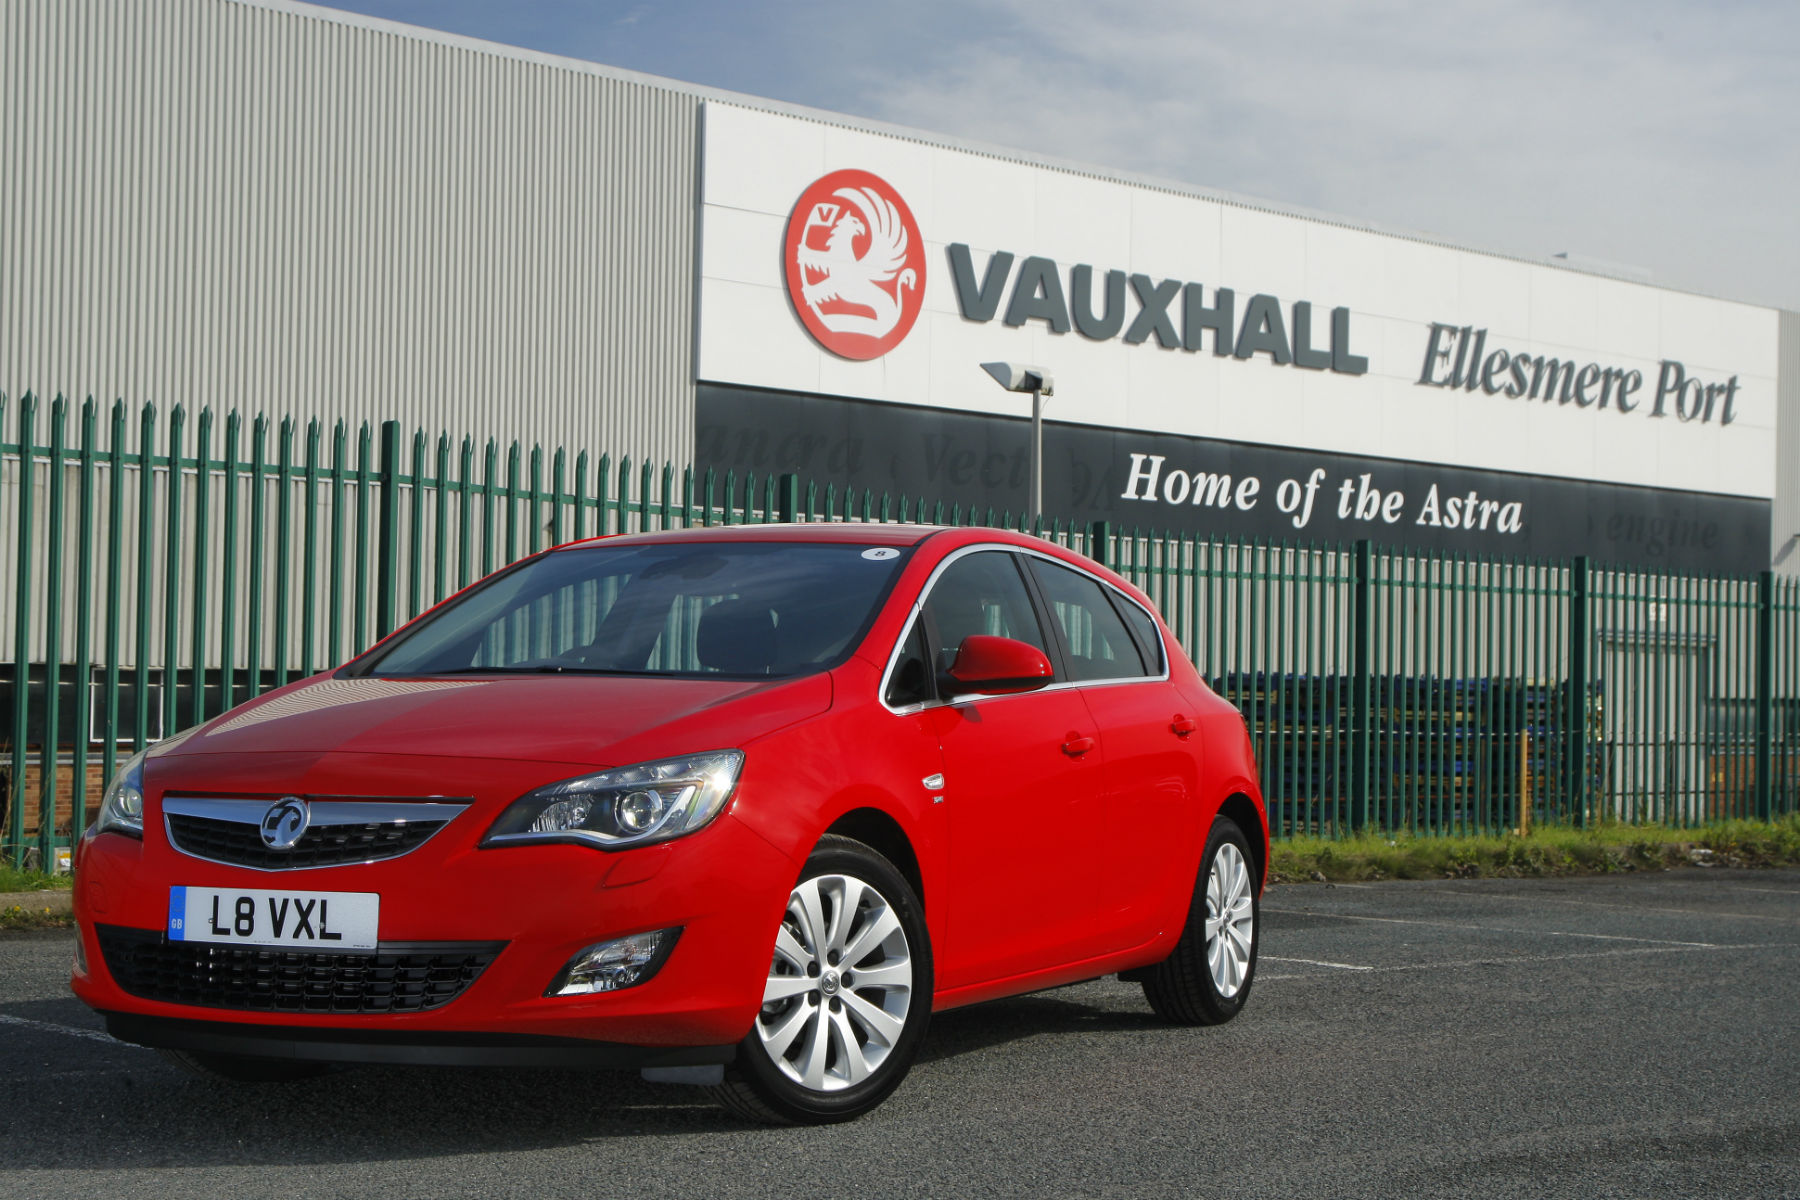 Confirmed: PSA Group is buying Vauxhall for £1.9bn